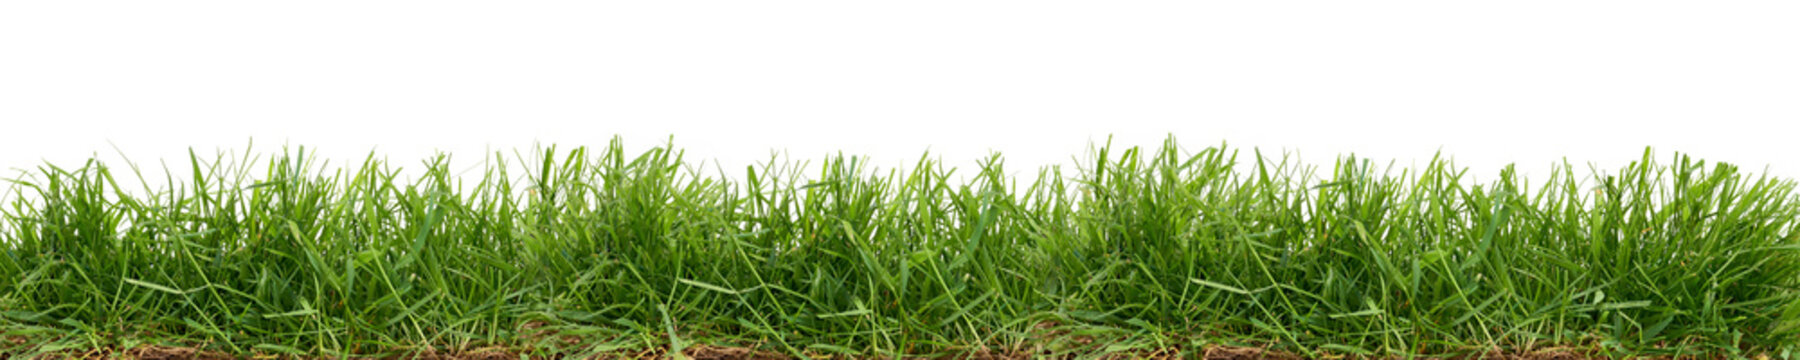 Fresh green grass isolated against a white background © Duncan Andison